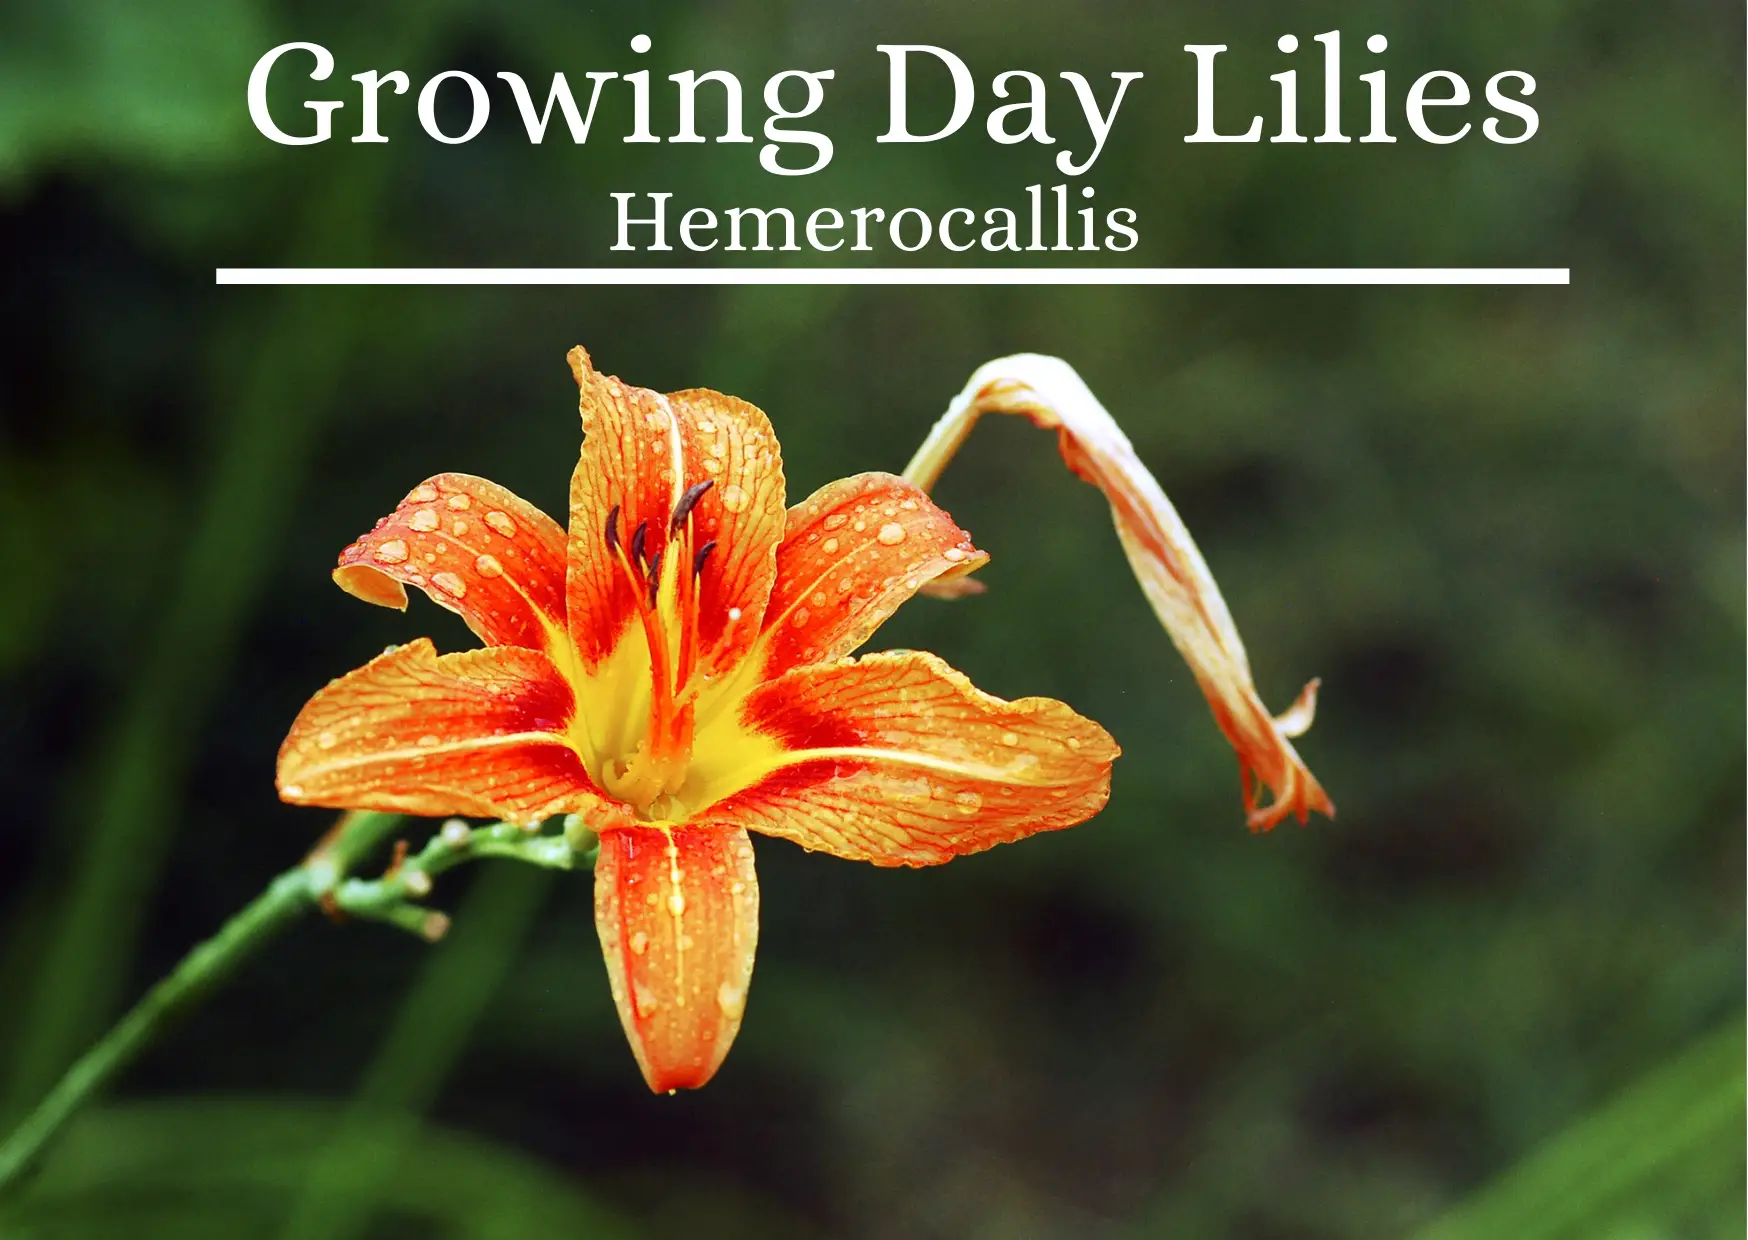 Growing Day Lilies